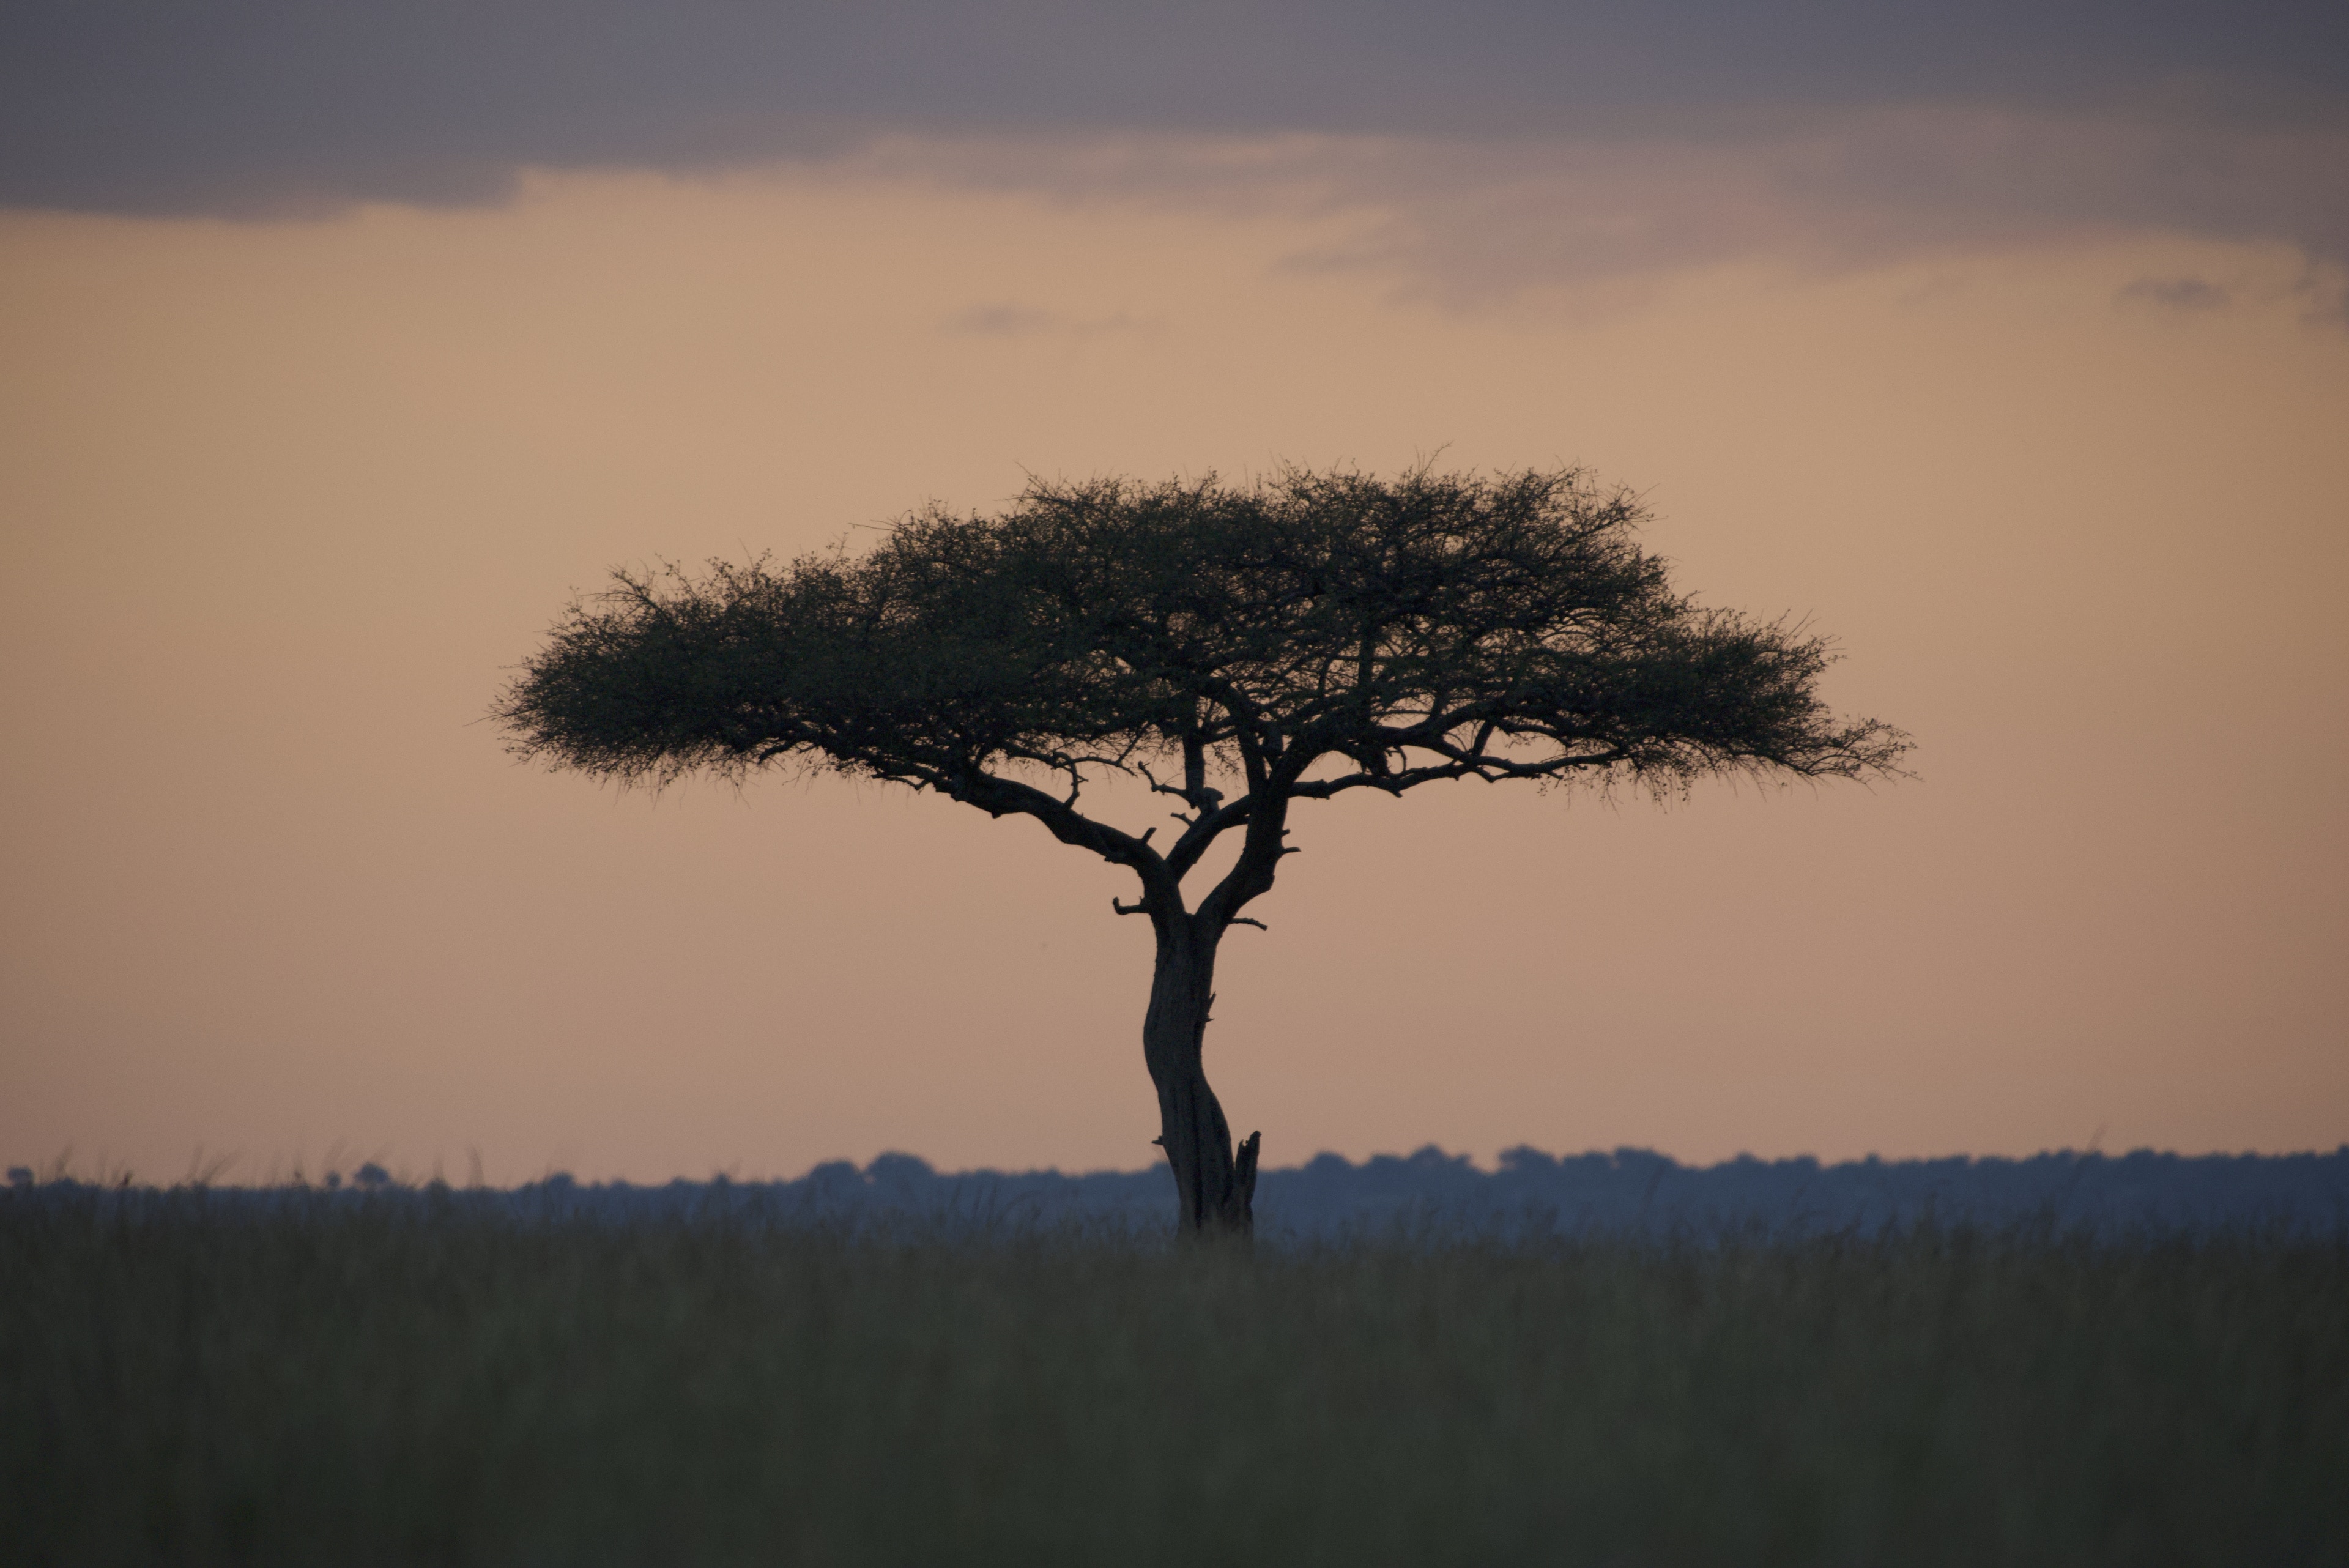 Quintessential sunrise safari landscapes and colors on the plains of Kenya's Mara North Conservancy.  Shot in pre-dawn hours with Nikon D750 with Nikkor 300mm f2.8 AF-S ED VR II Super Telephoto Lens.